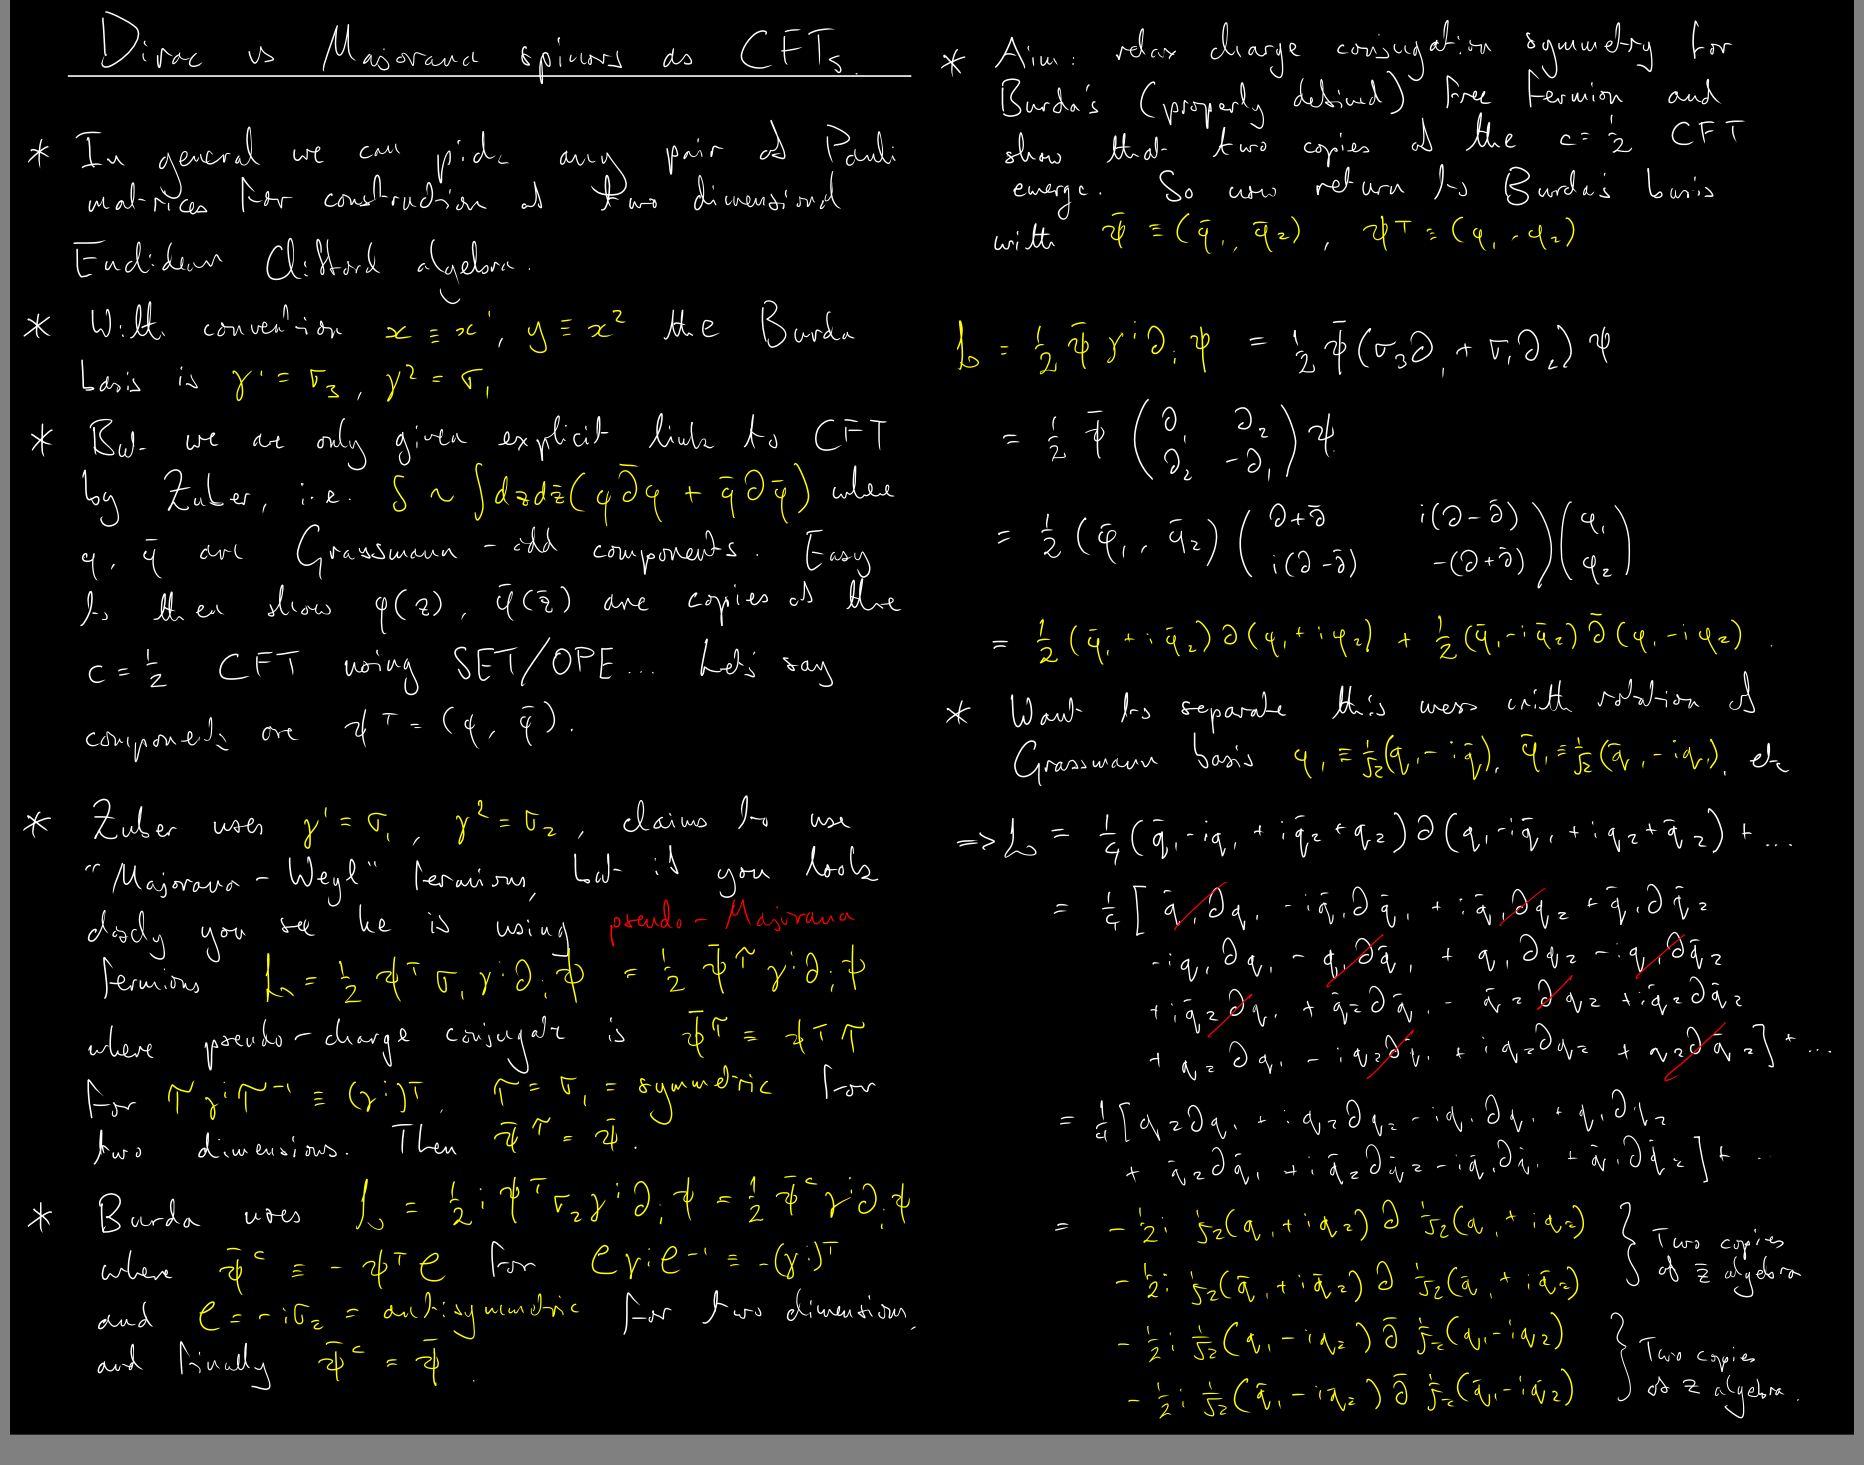 Supervision notes on Dirac Lagrangia in complexified coordinates.